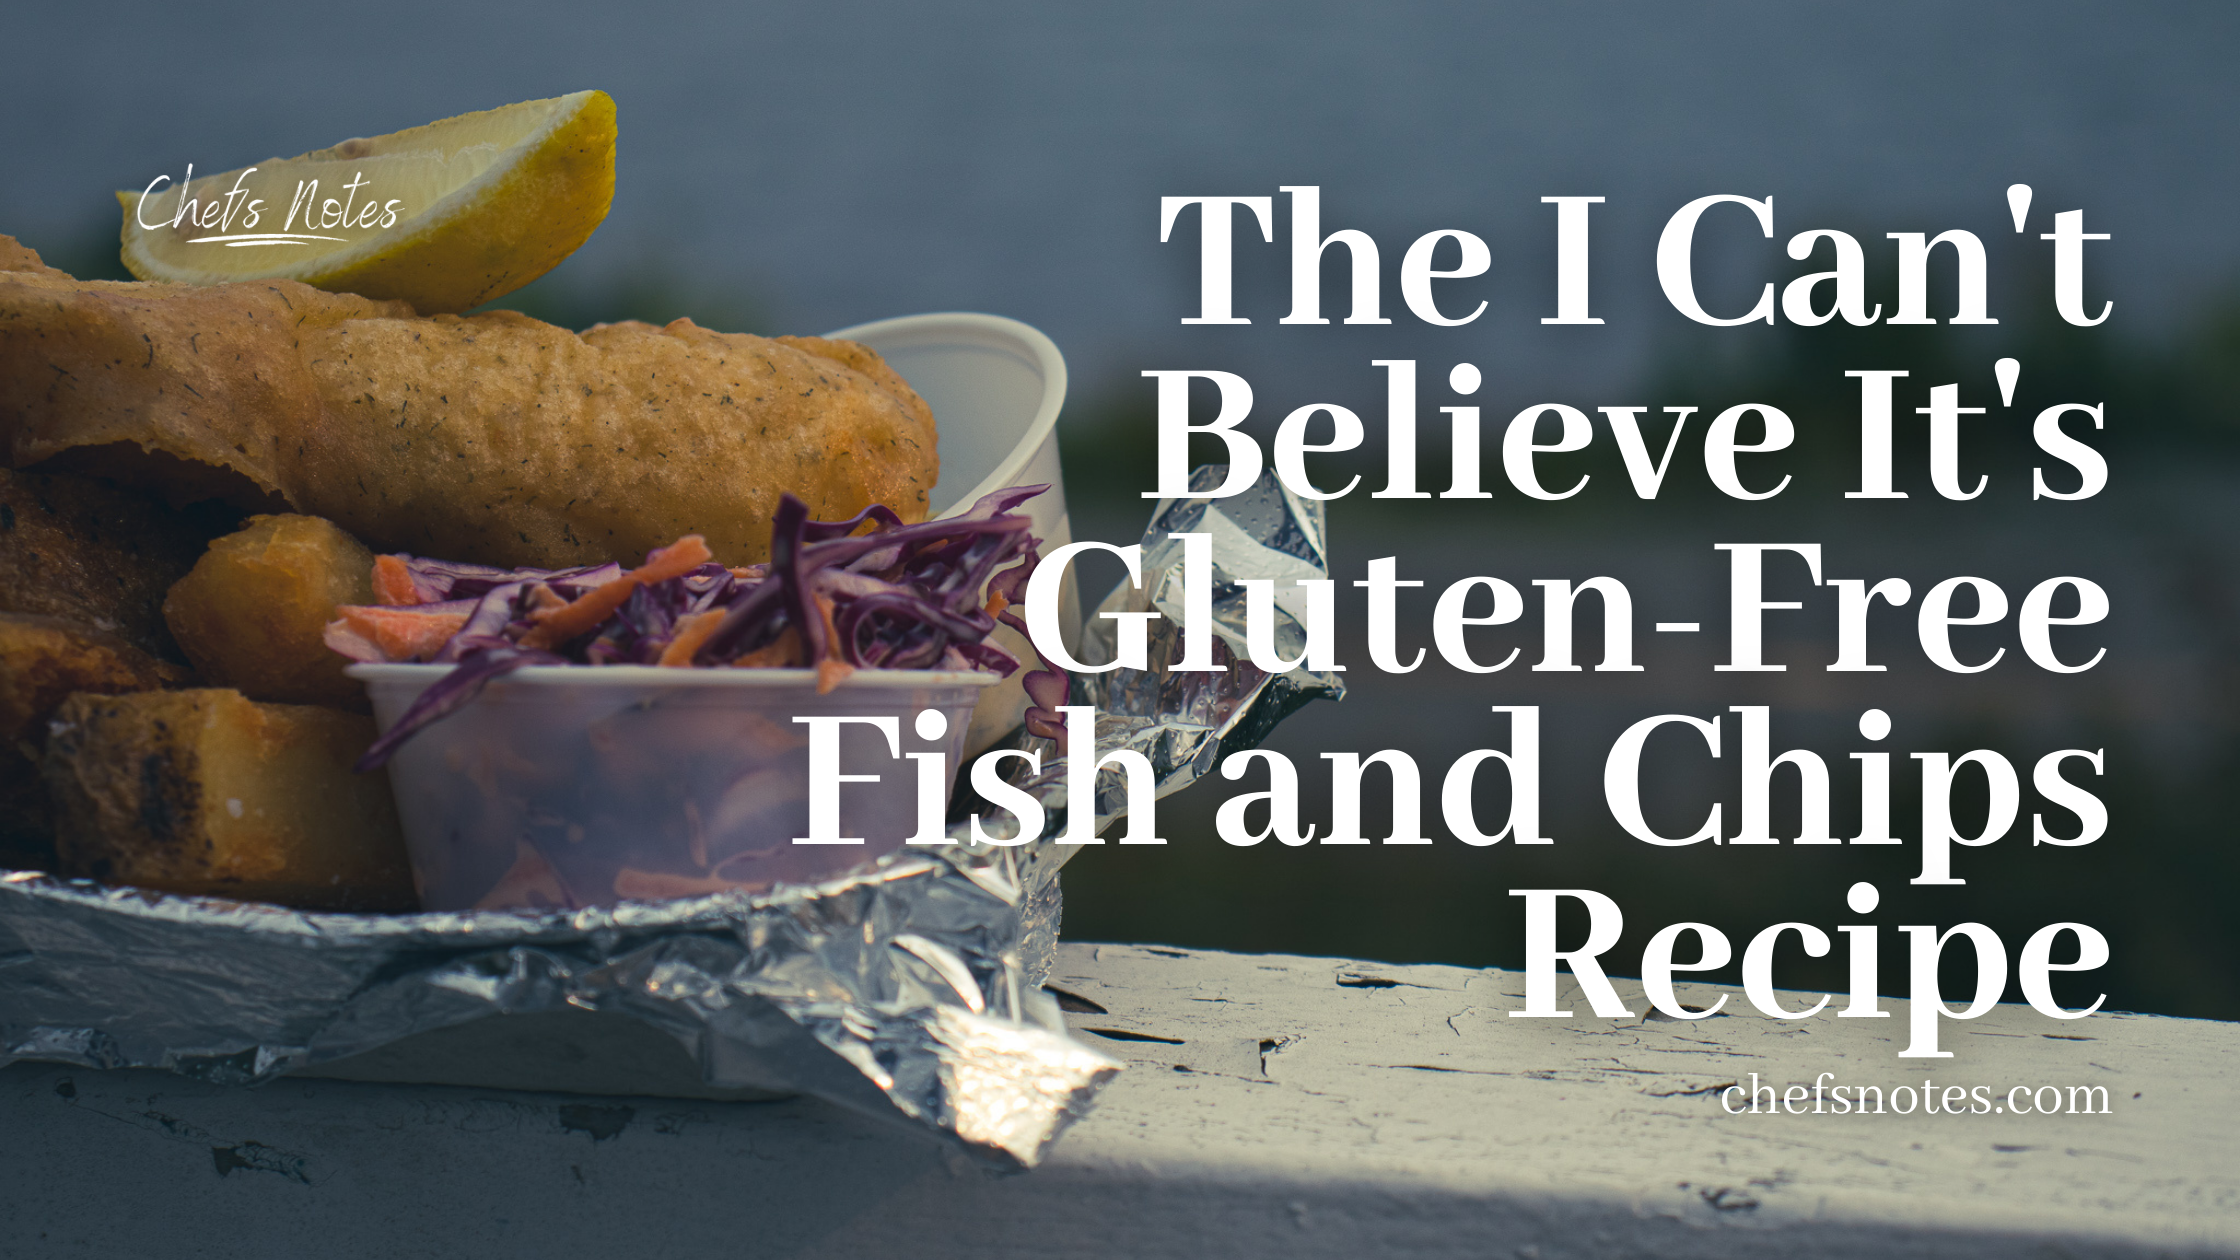 The I Can’t Believe It’s Gluten-Free Fish and Chips Recipe